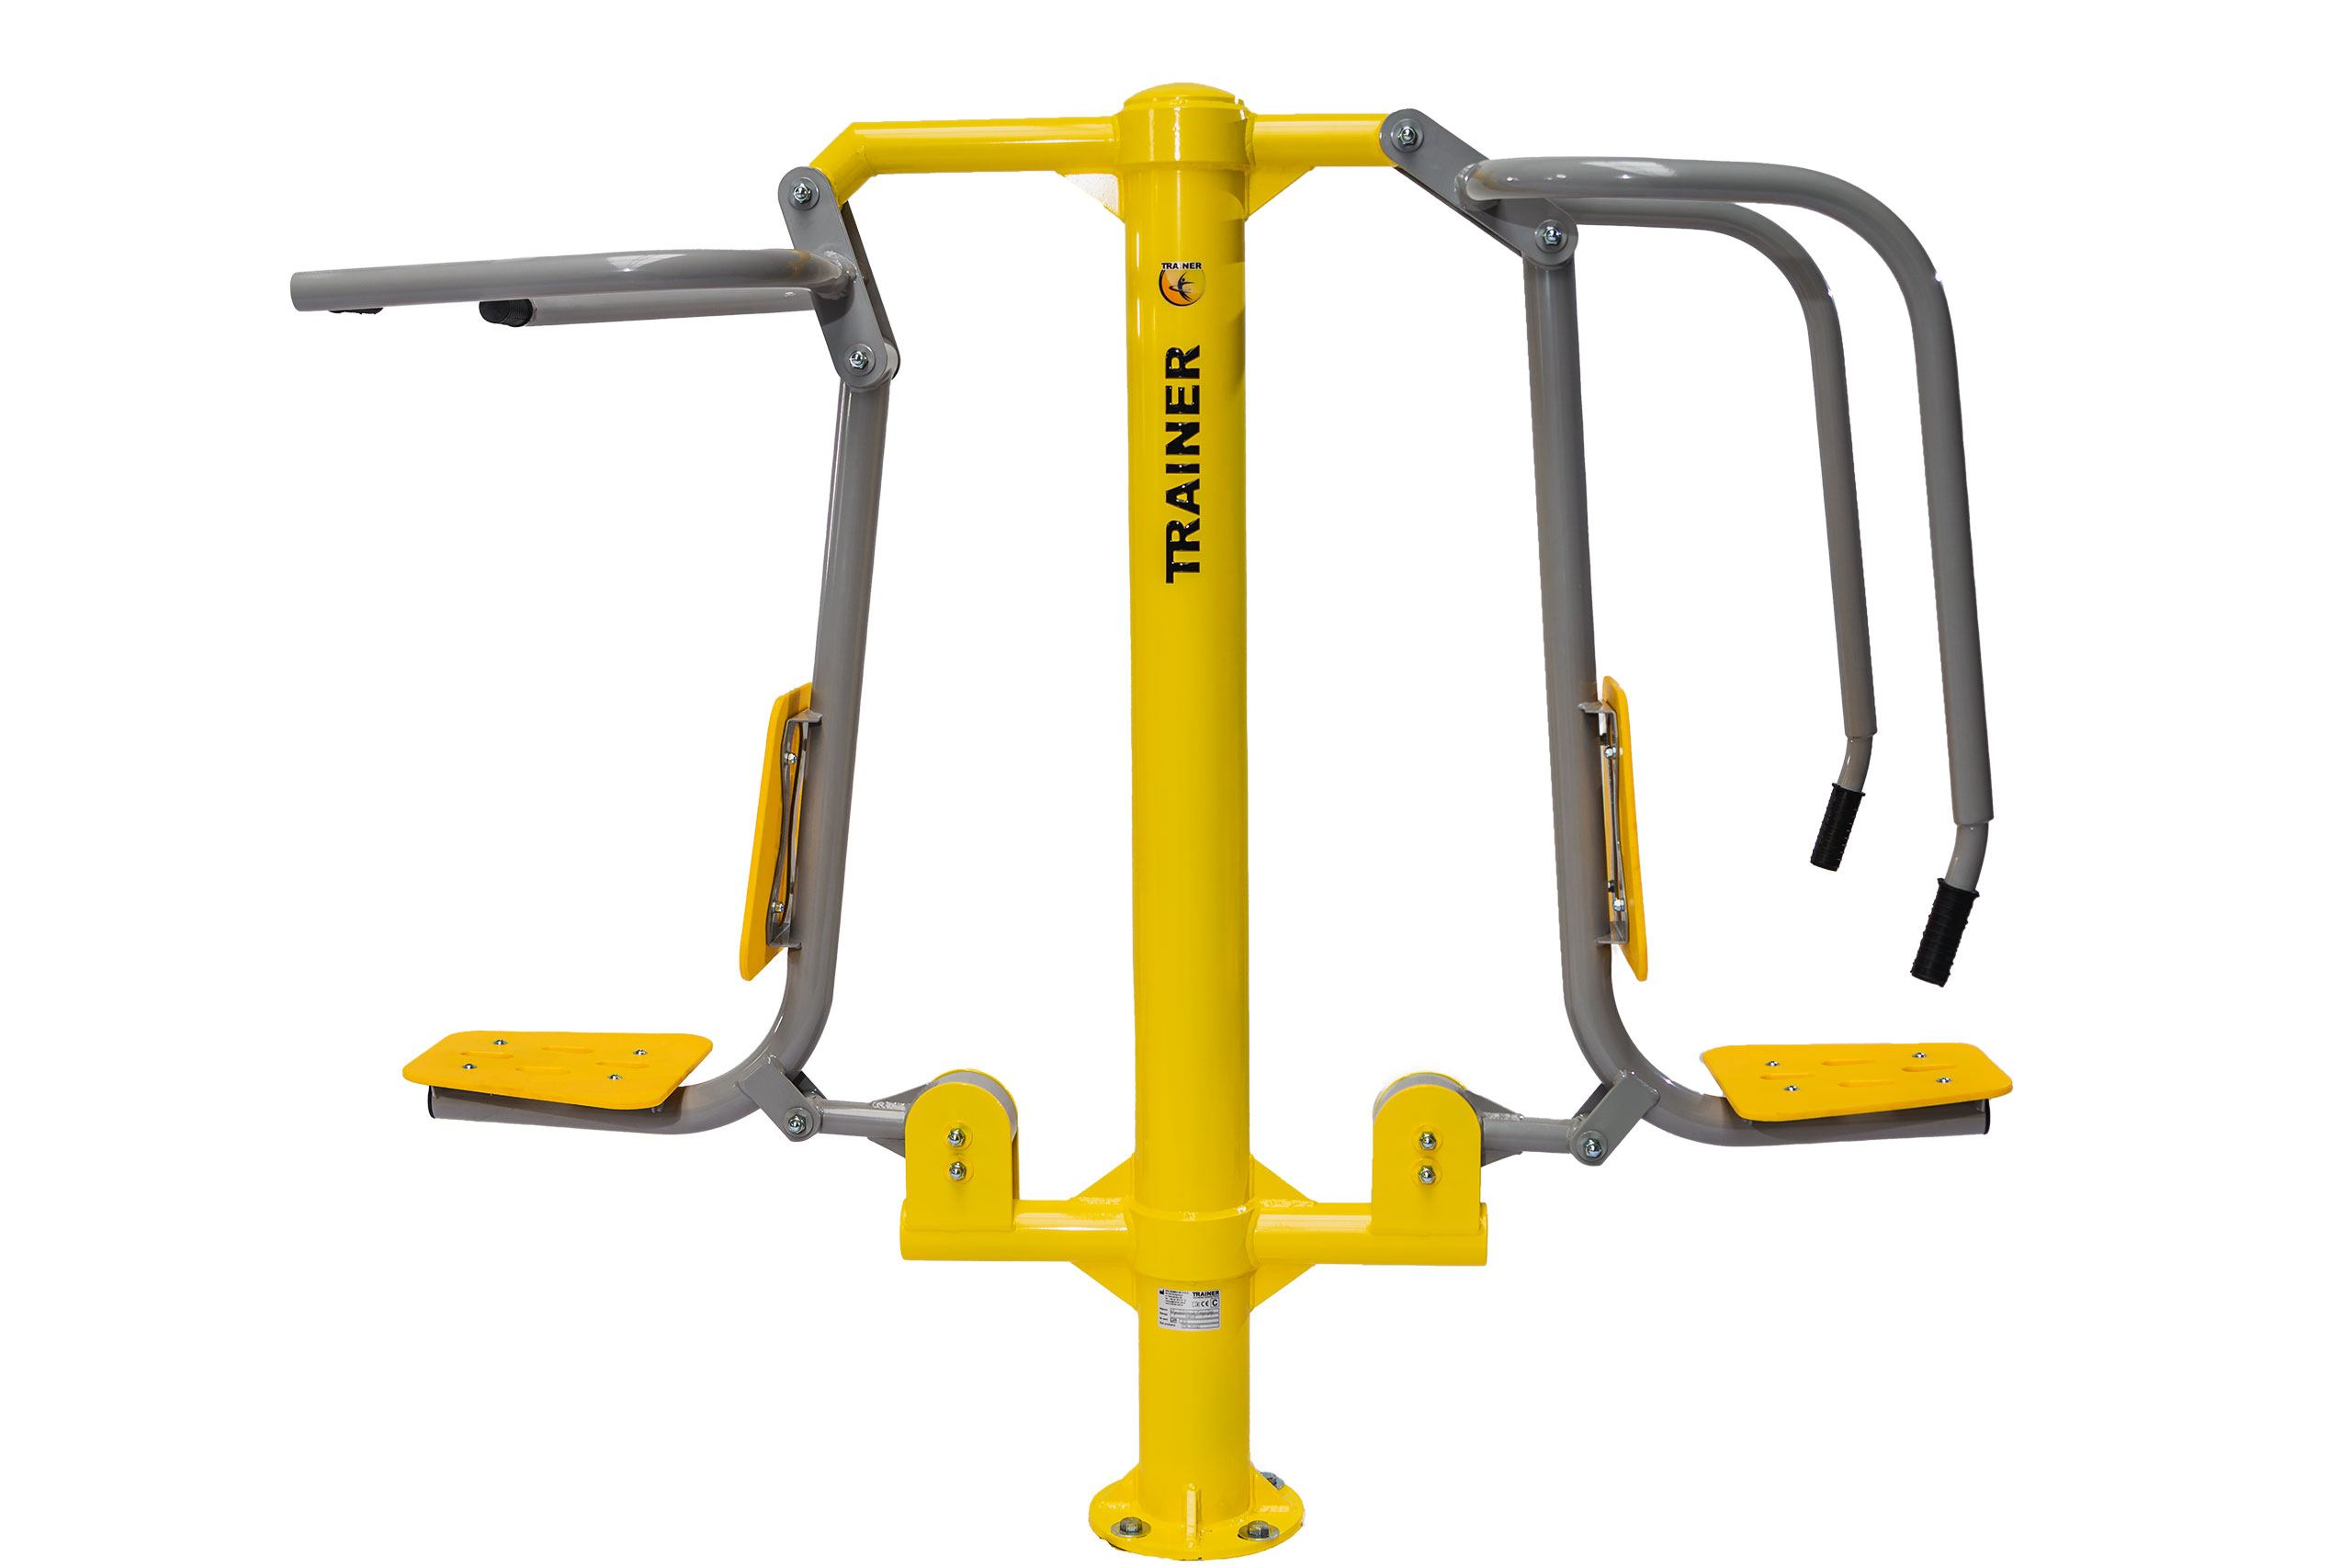 Push & Pull Chairs Outdoor Fitness Equipment